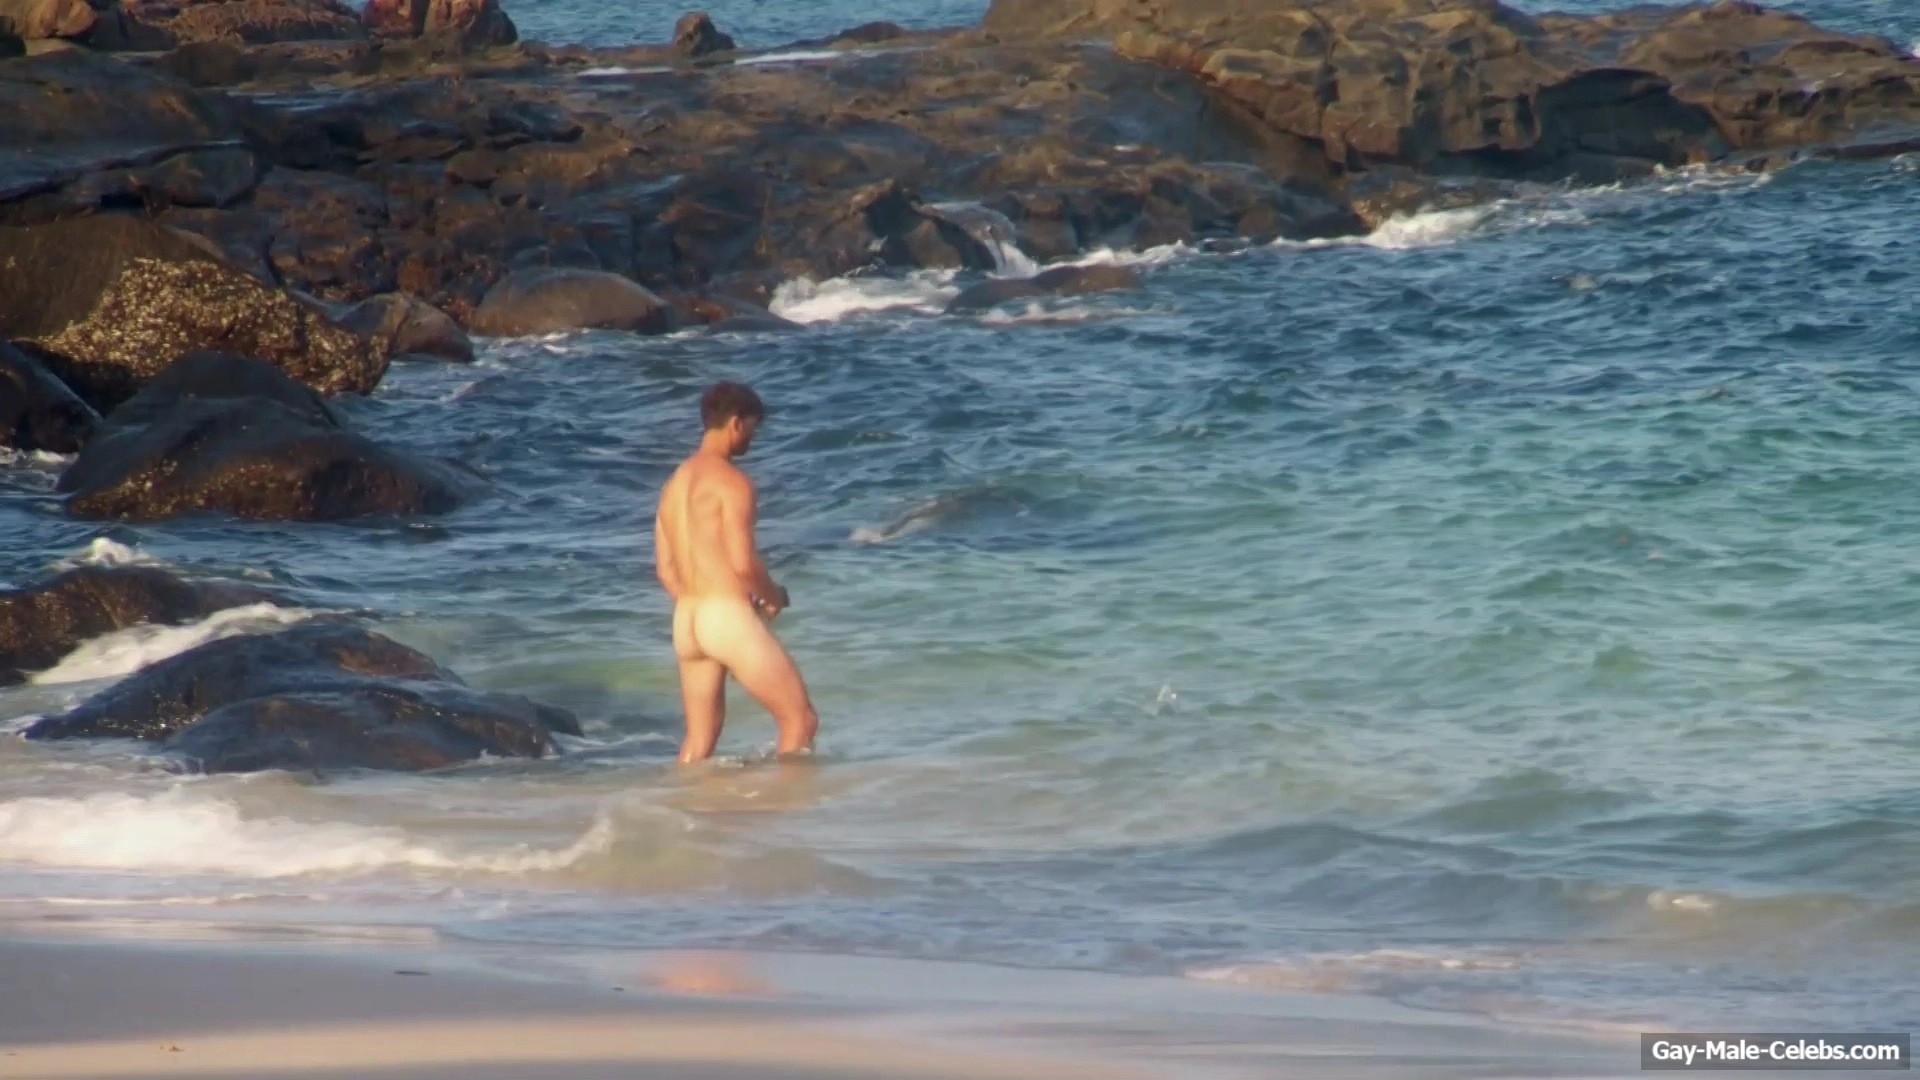 Marco D’Andrea Nude And Wet Underwear In ‘Treasure Island’ With Bear Grylls